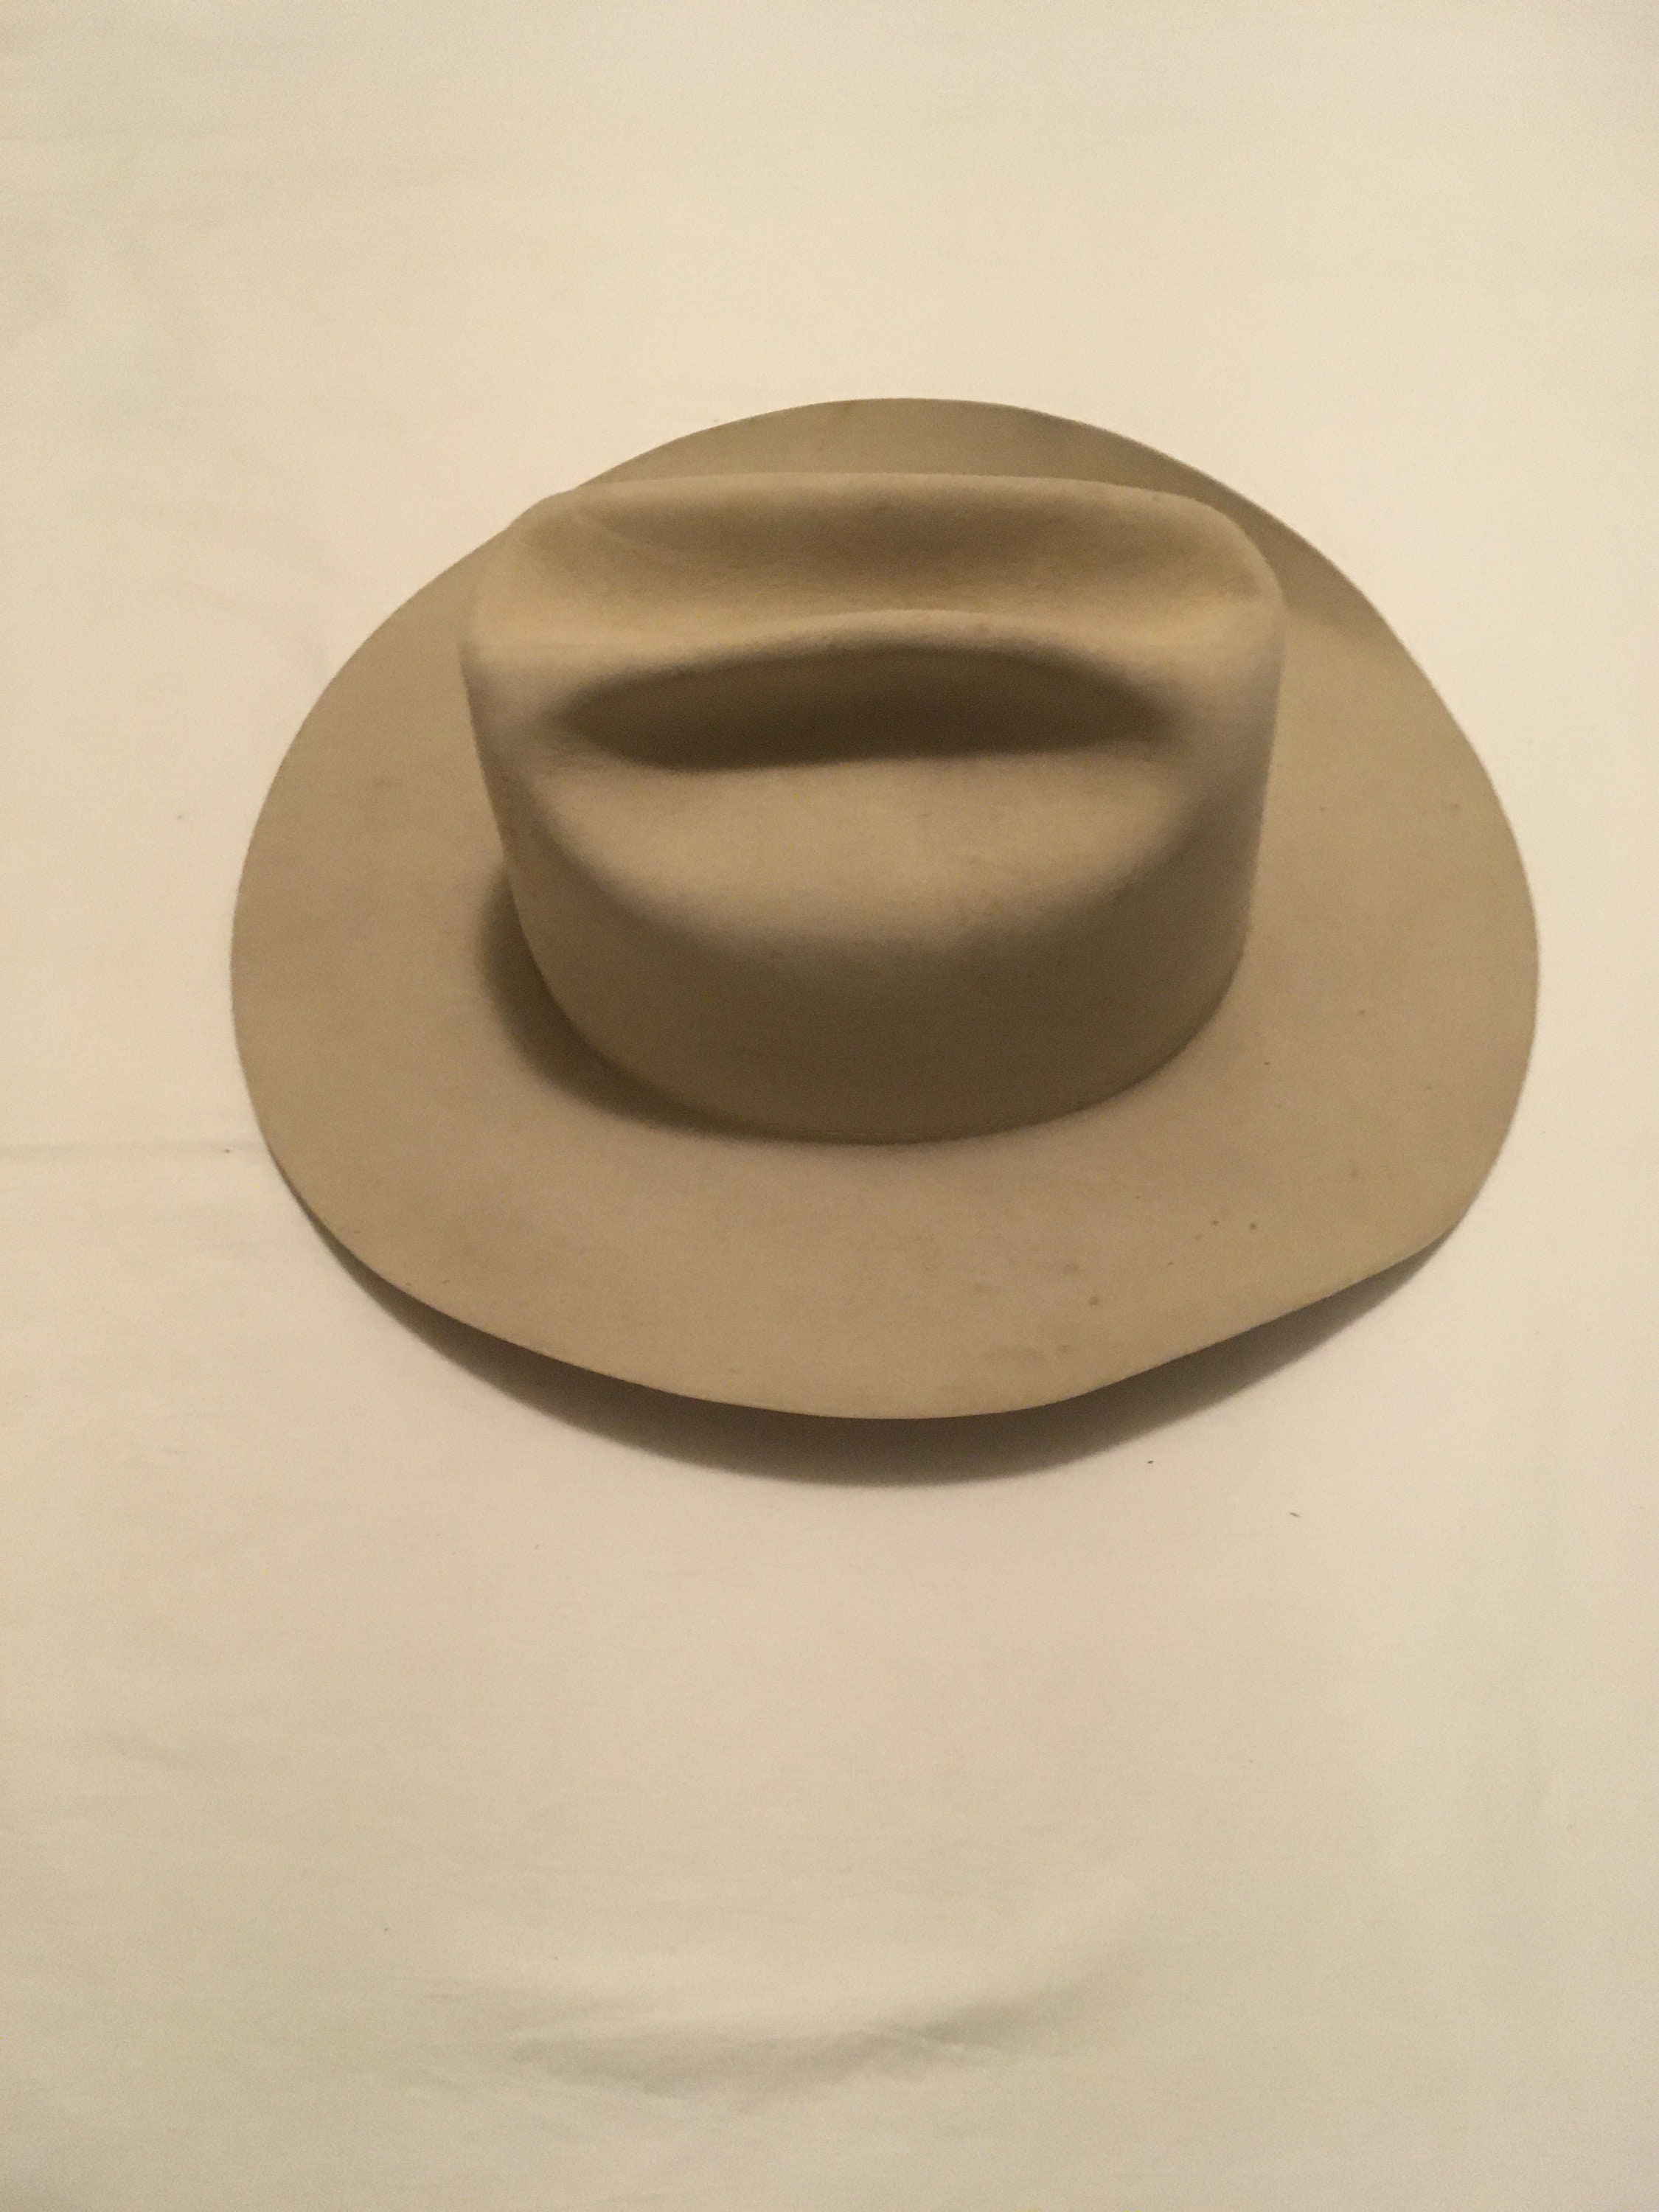 All Felt Hats Tagged saddle tan - Catalena Hatters